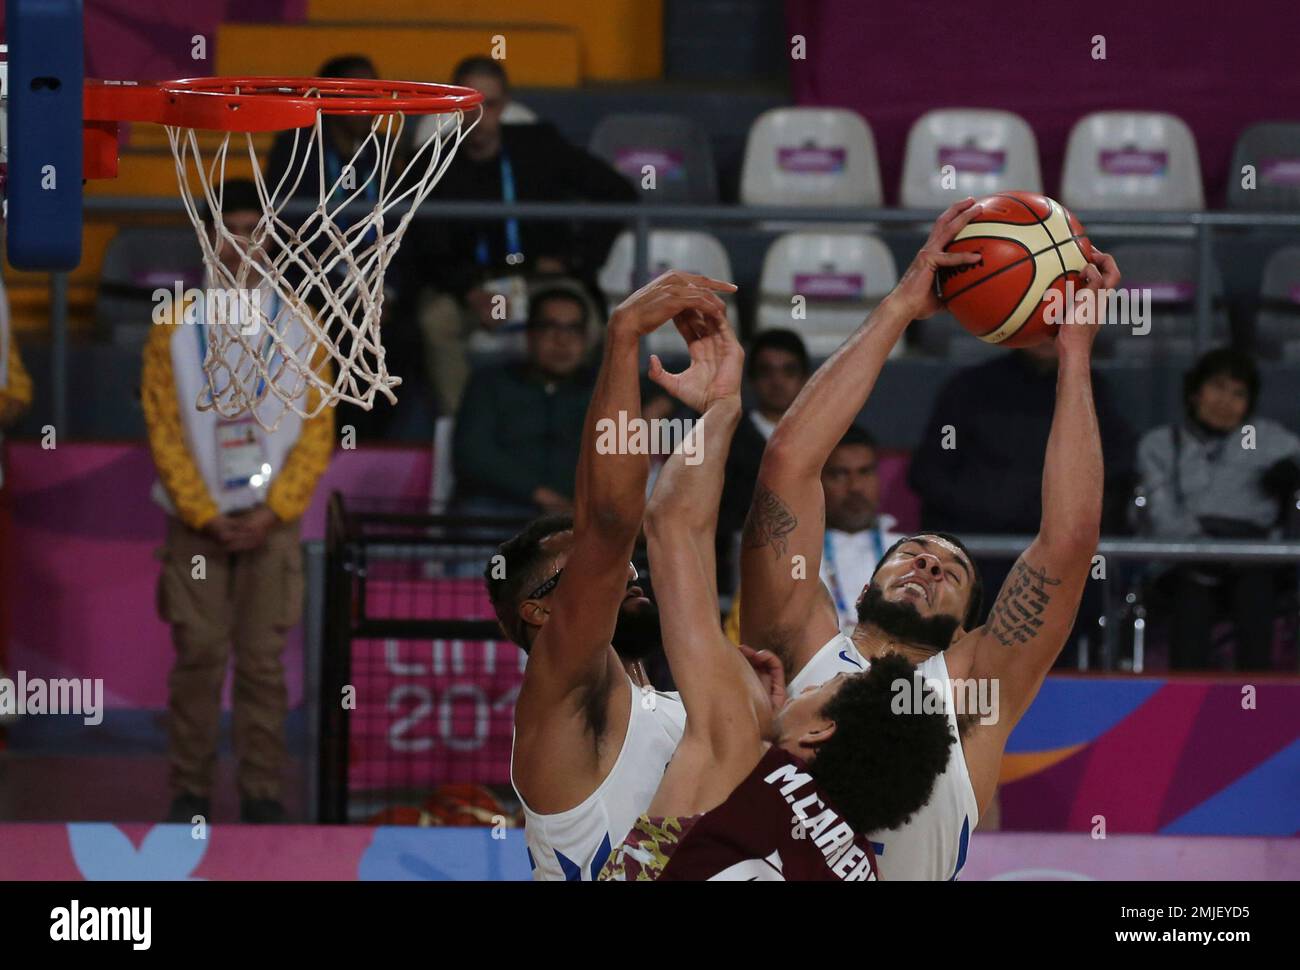 Puerto Rico's Emmanuel Andujar takes a rebound over Venezuela's Michael  Carrera during their basketball first round game at the Pan American Games  in Lima, Peru, Wednesday, July 31, 2019. (AP Photo/Fernando Llano